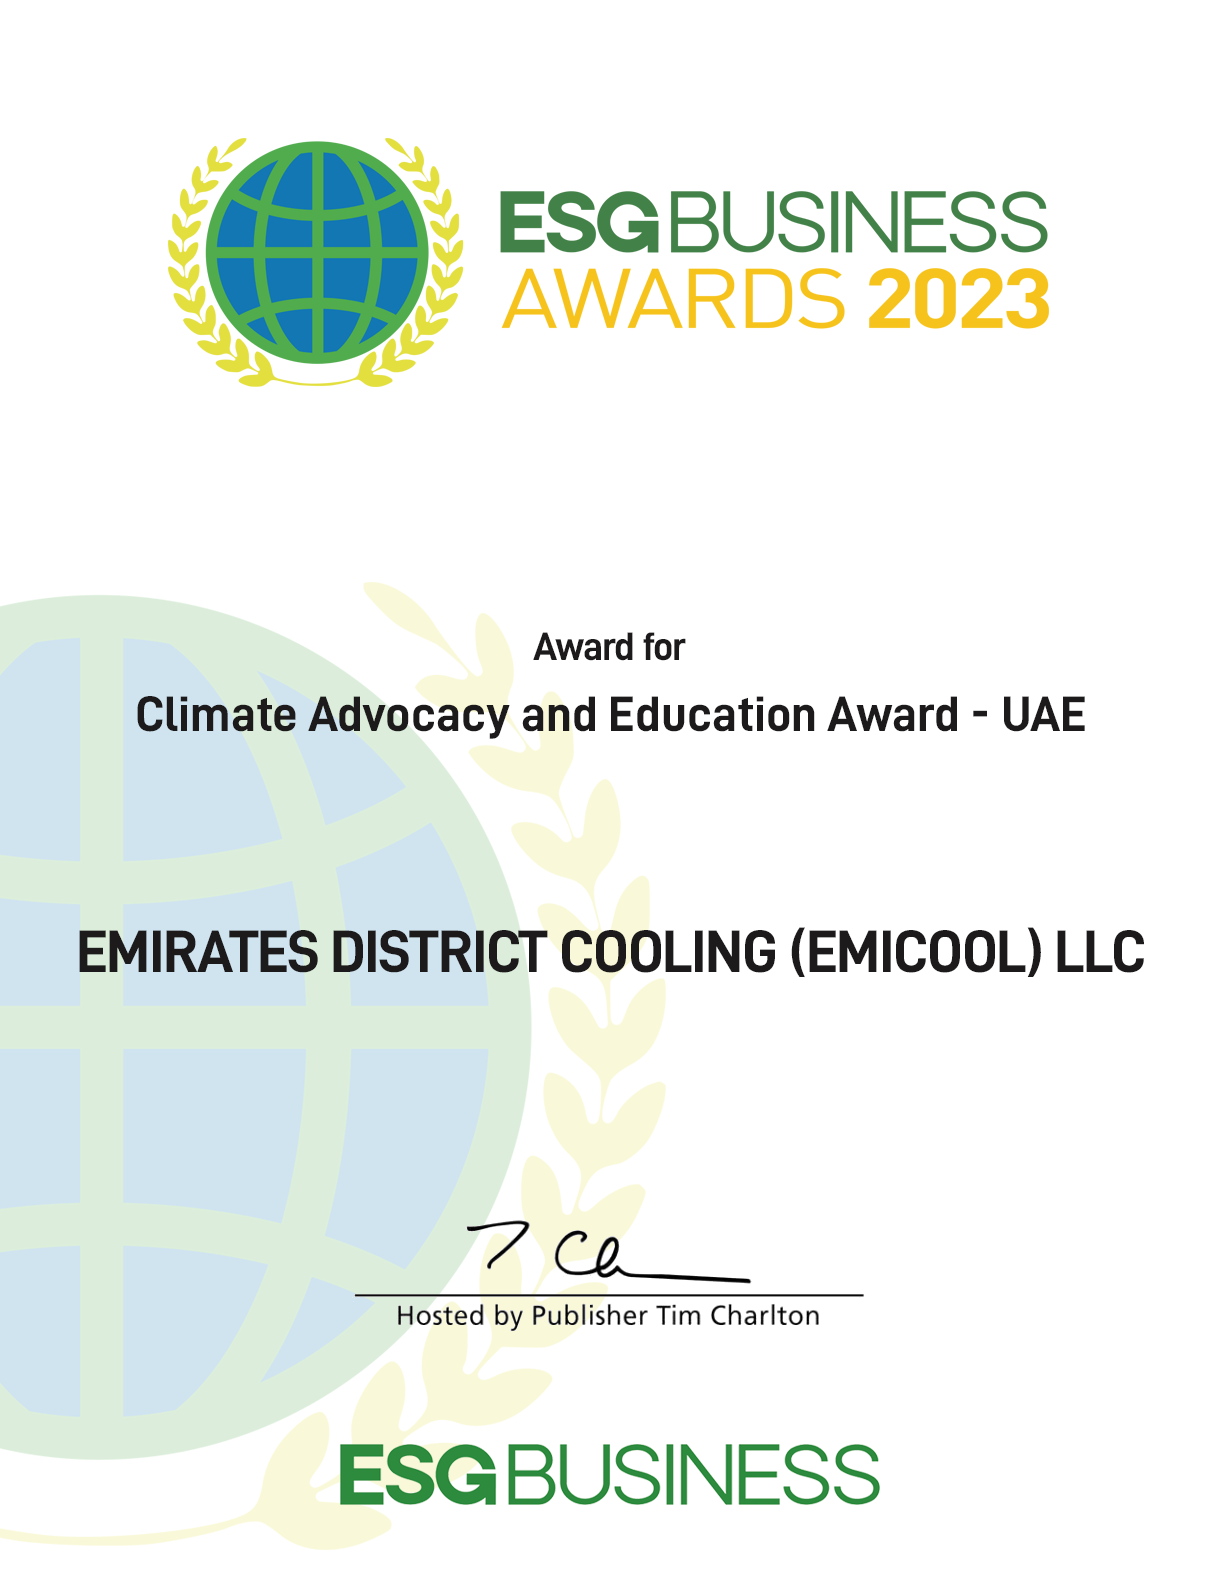 ESG Business Awards 2023 for Climate Advocacy and Education